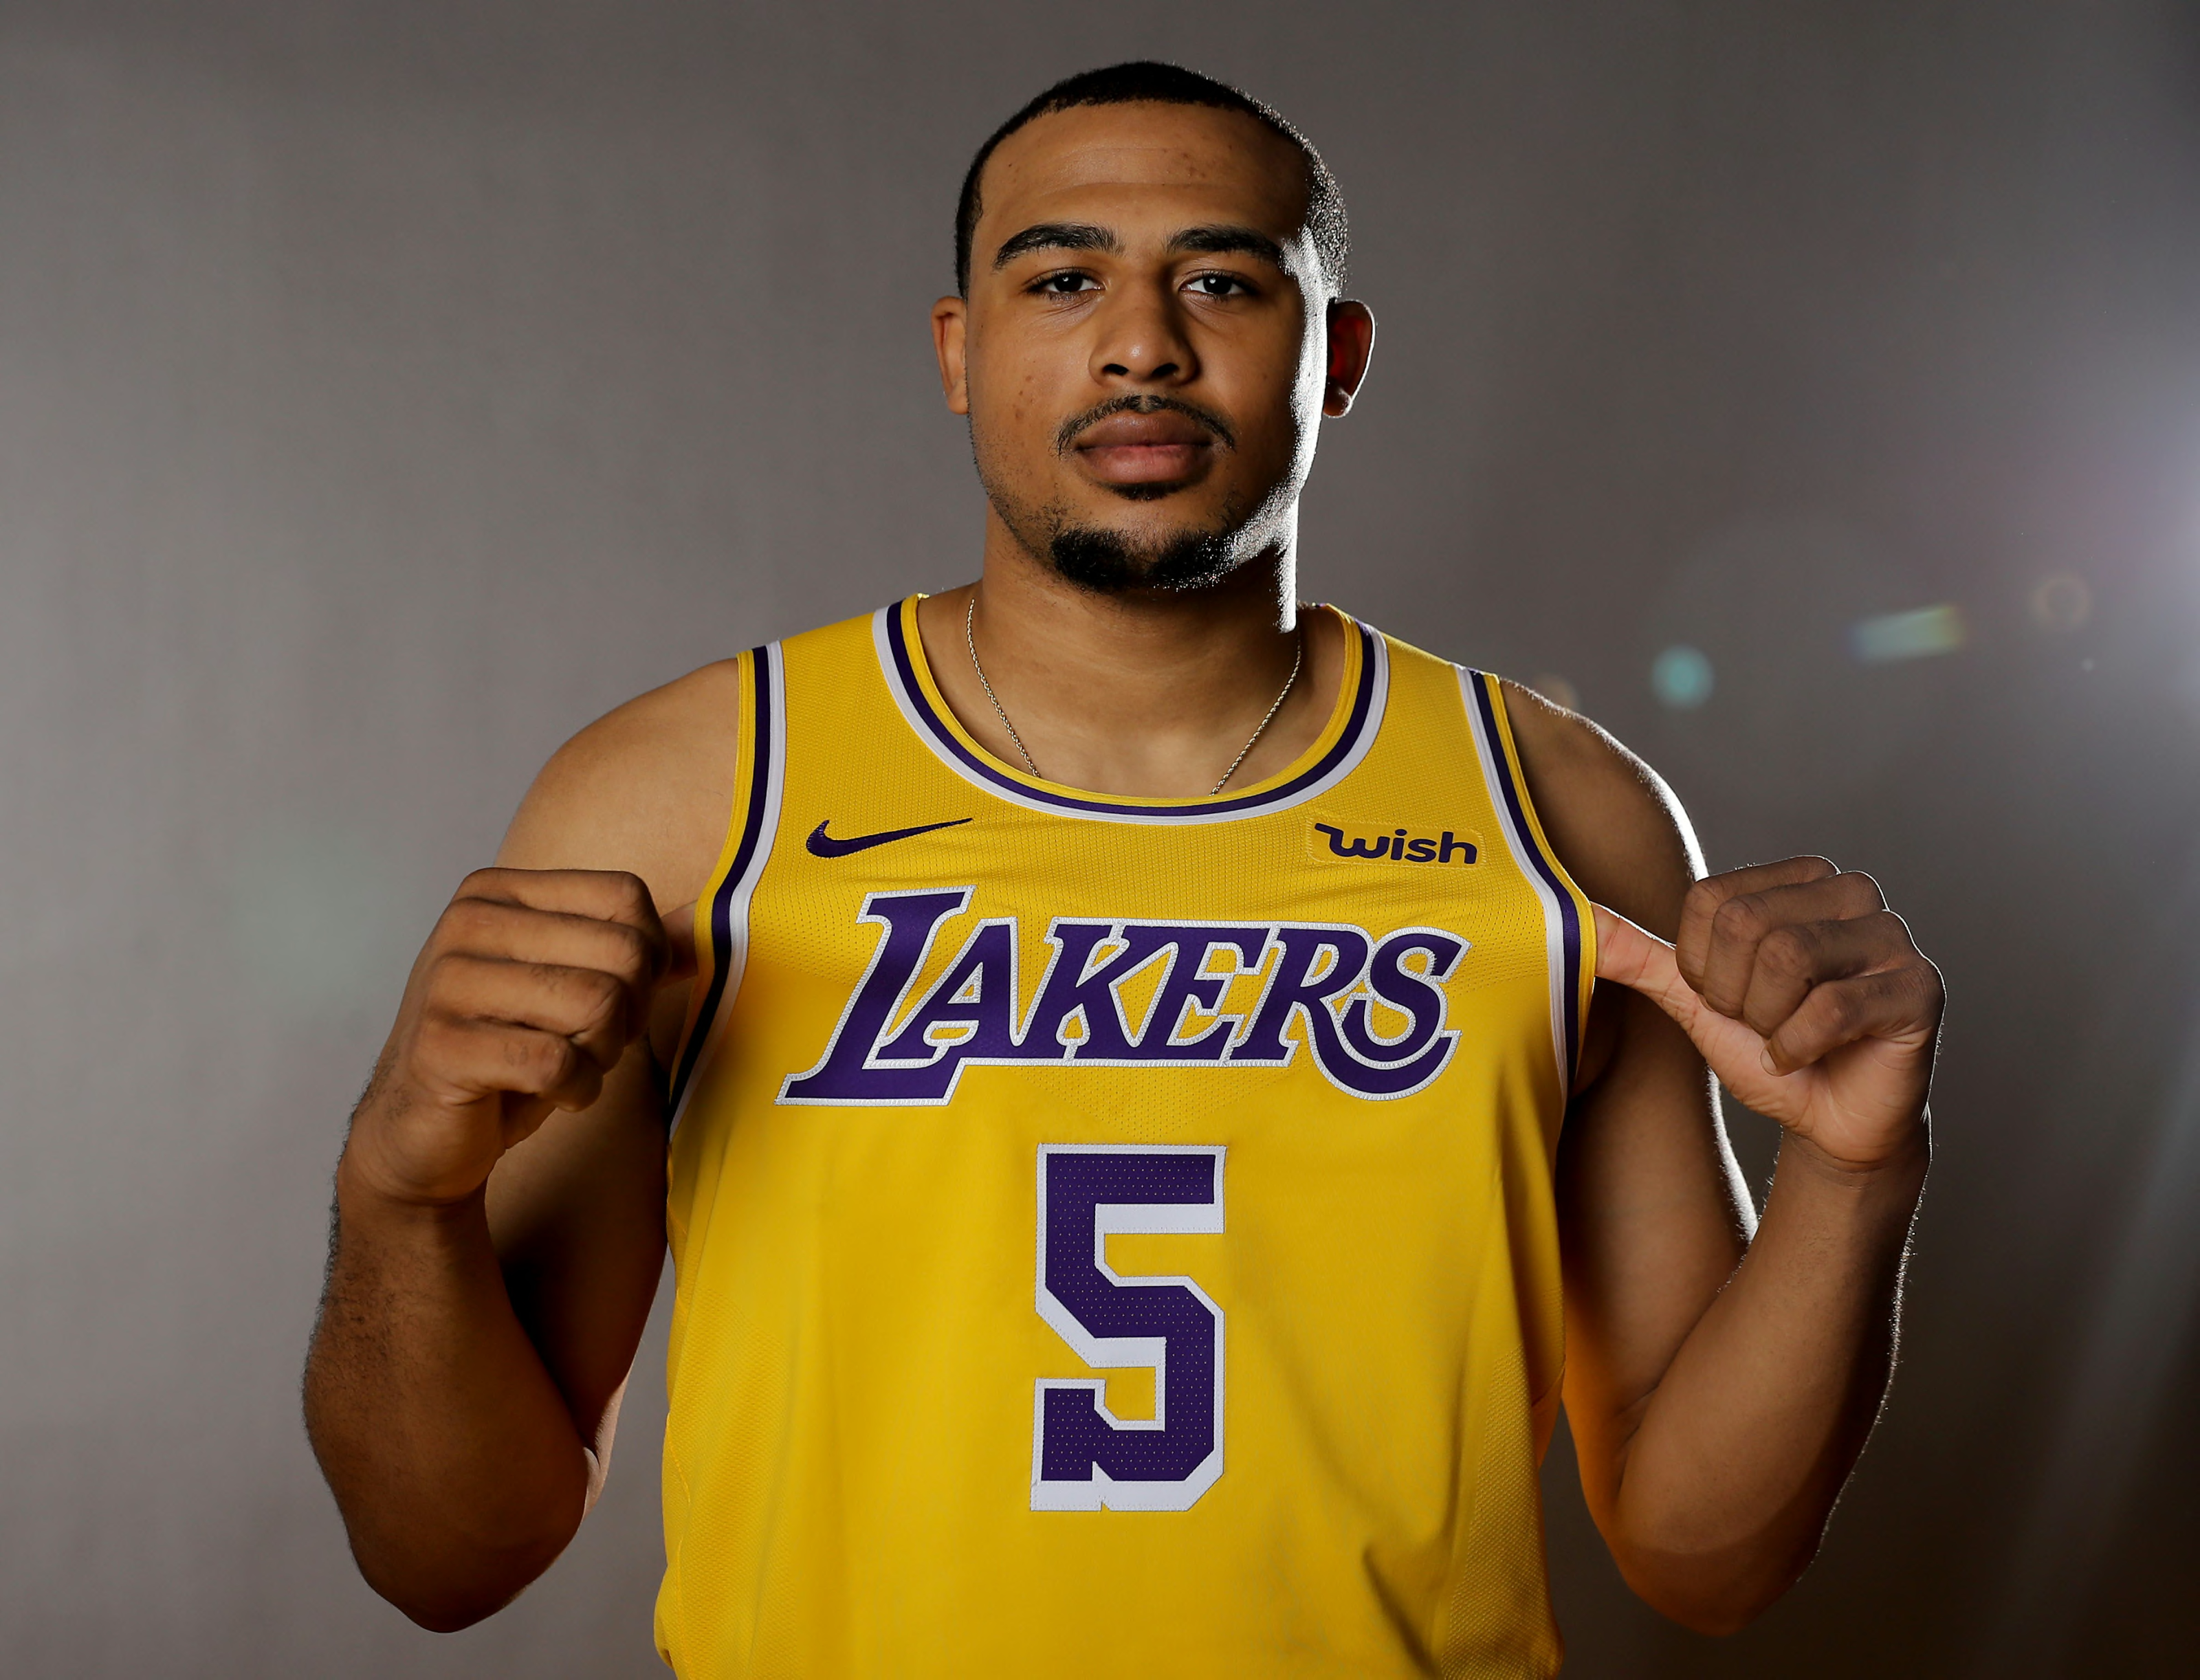 lakers player number 3